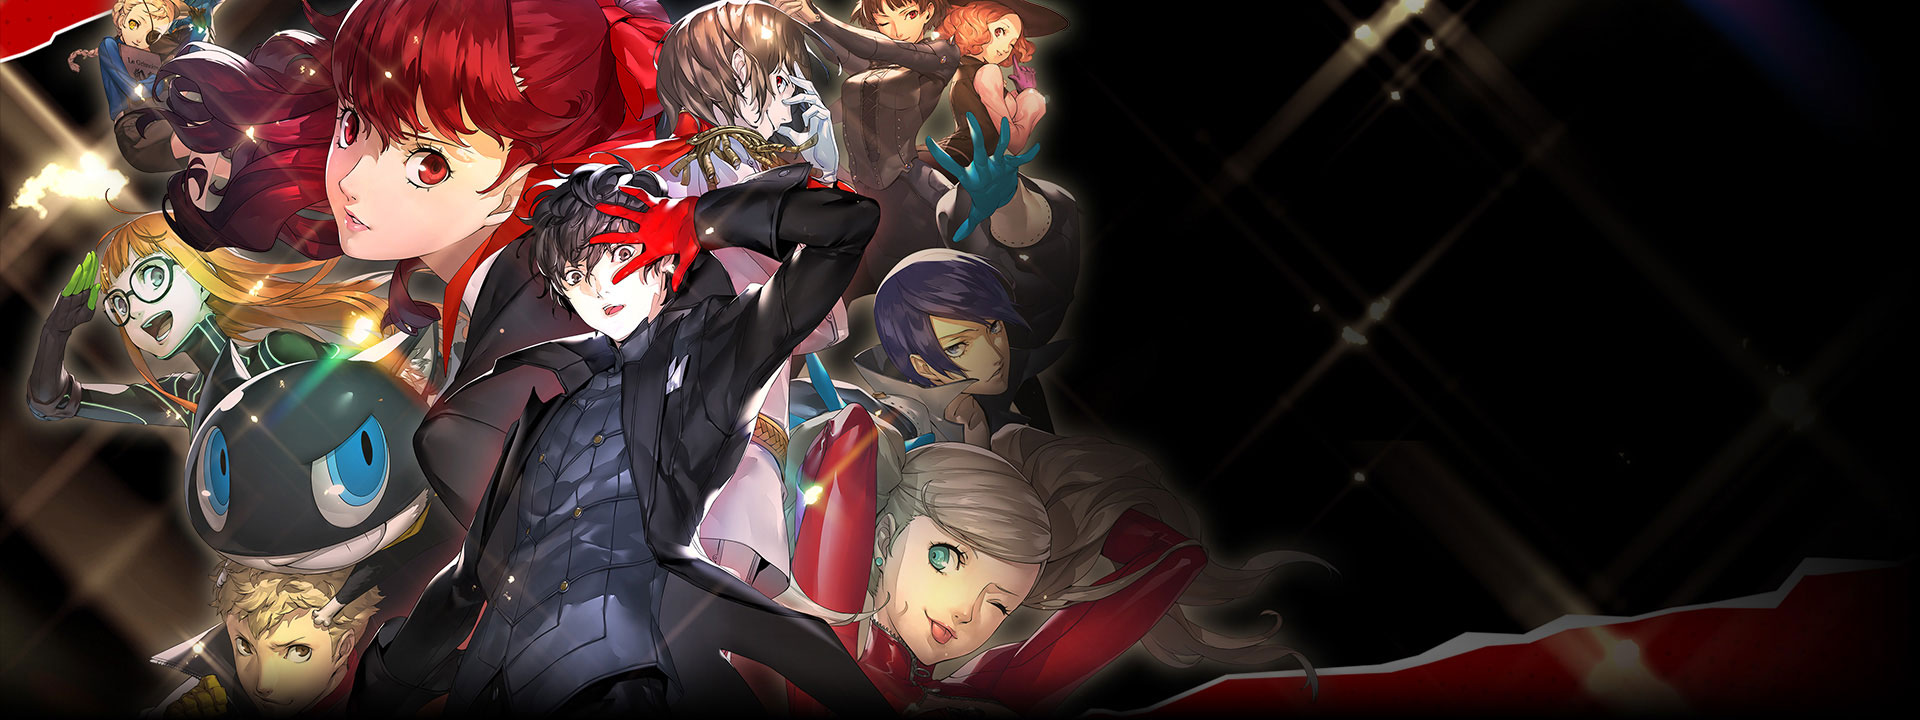 Joker poses with other persona characters posing behind him.